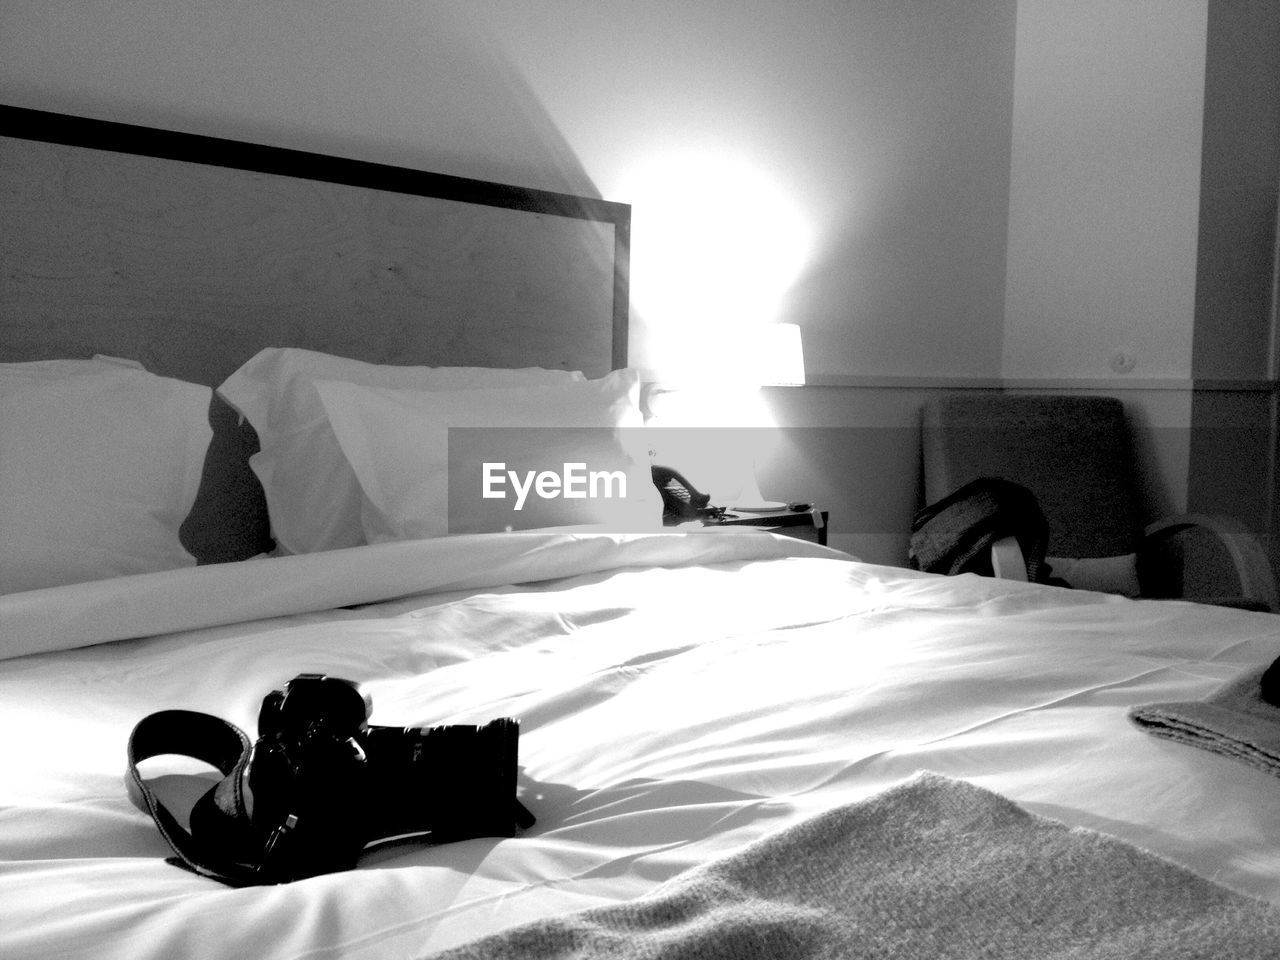 Camera on bed in hotel room